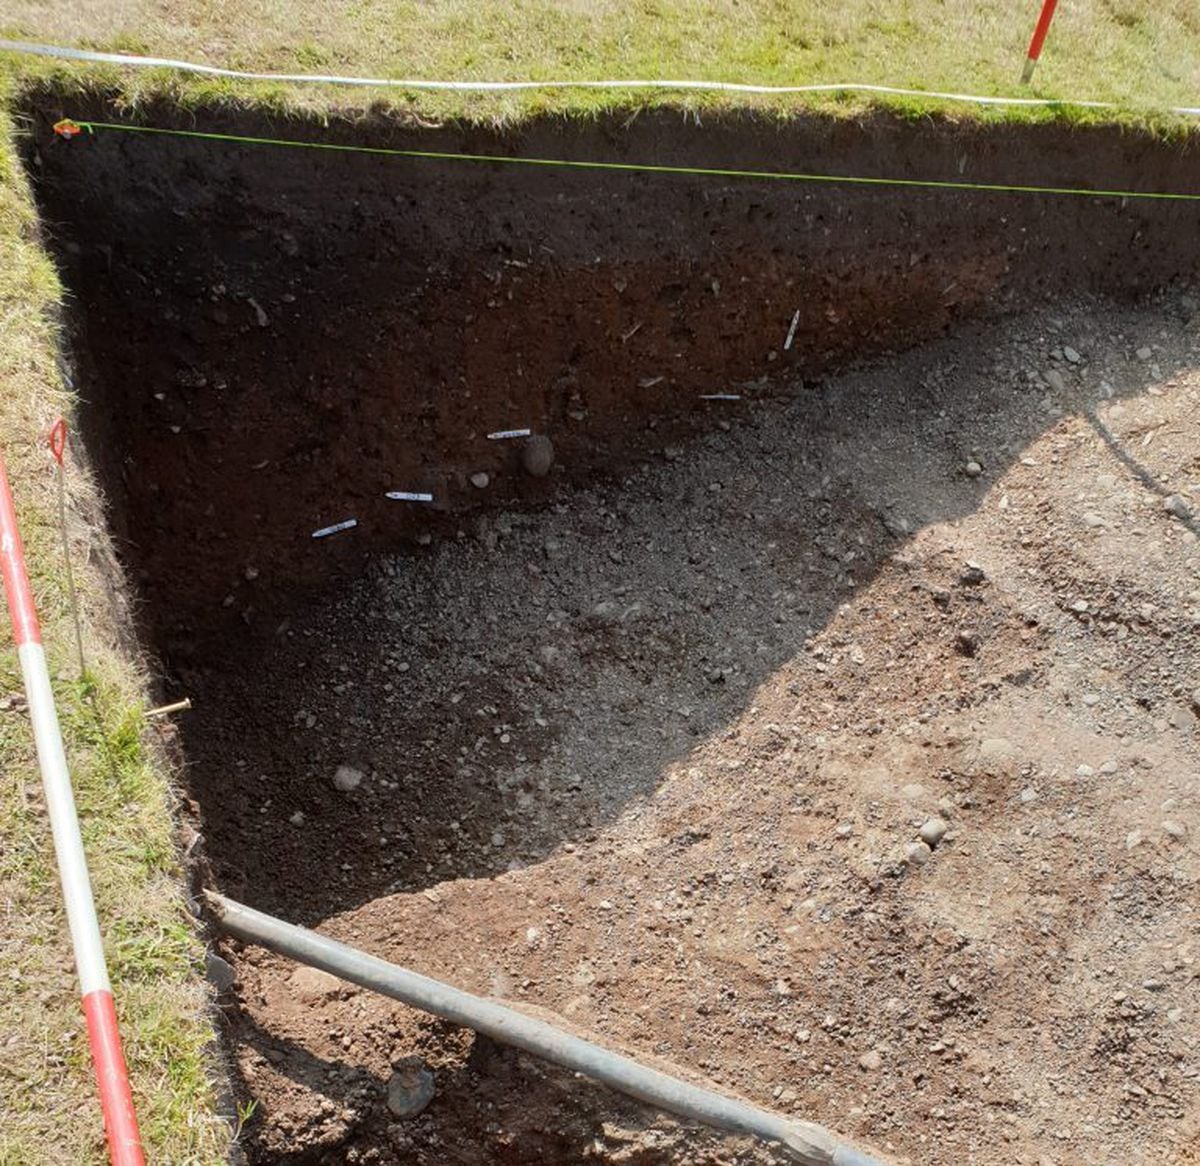 The Norman motte ditch found during the excavation